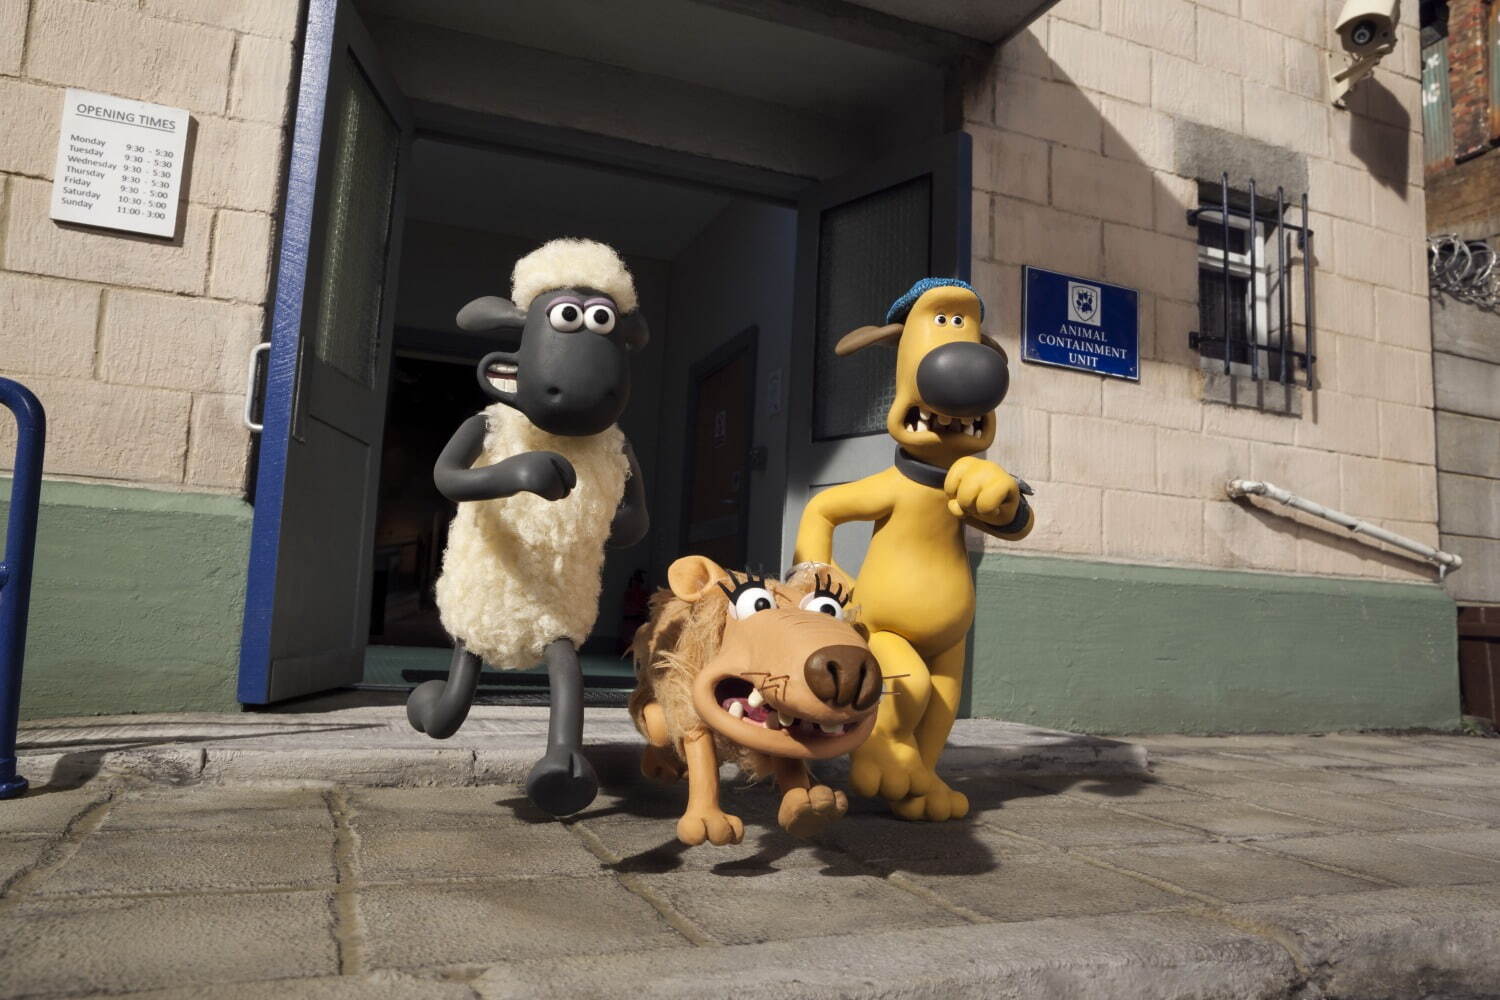 © 2014 Aardman Animations Limited and Studiocanal S.A.